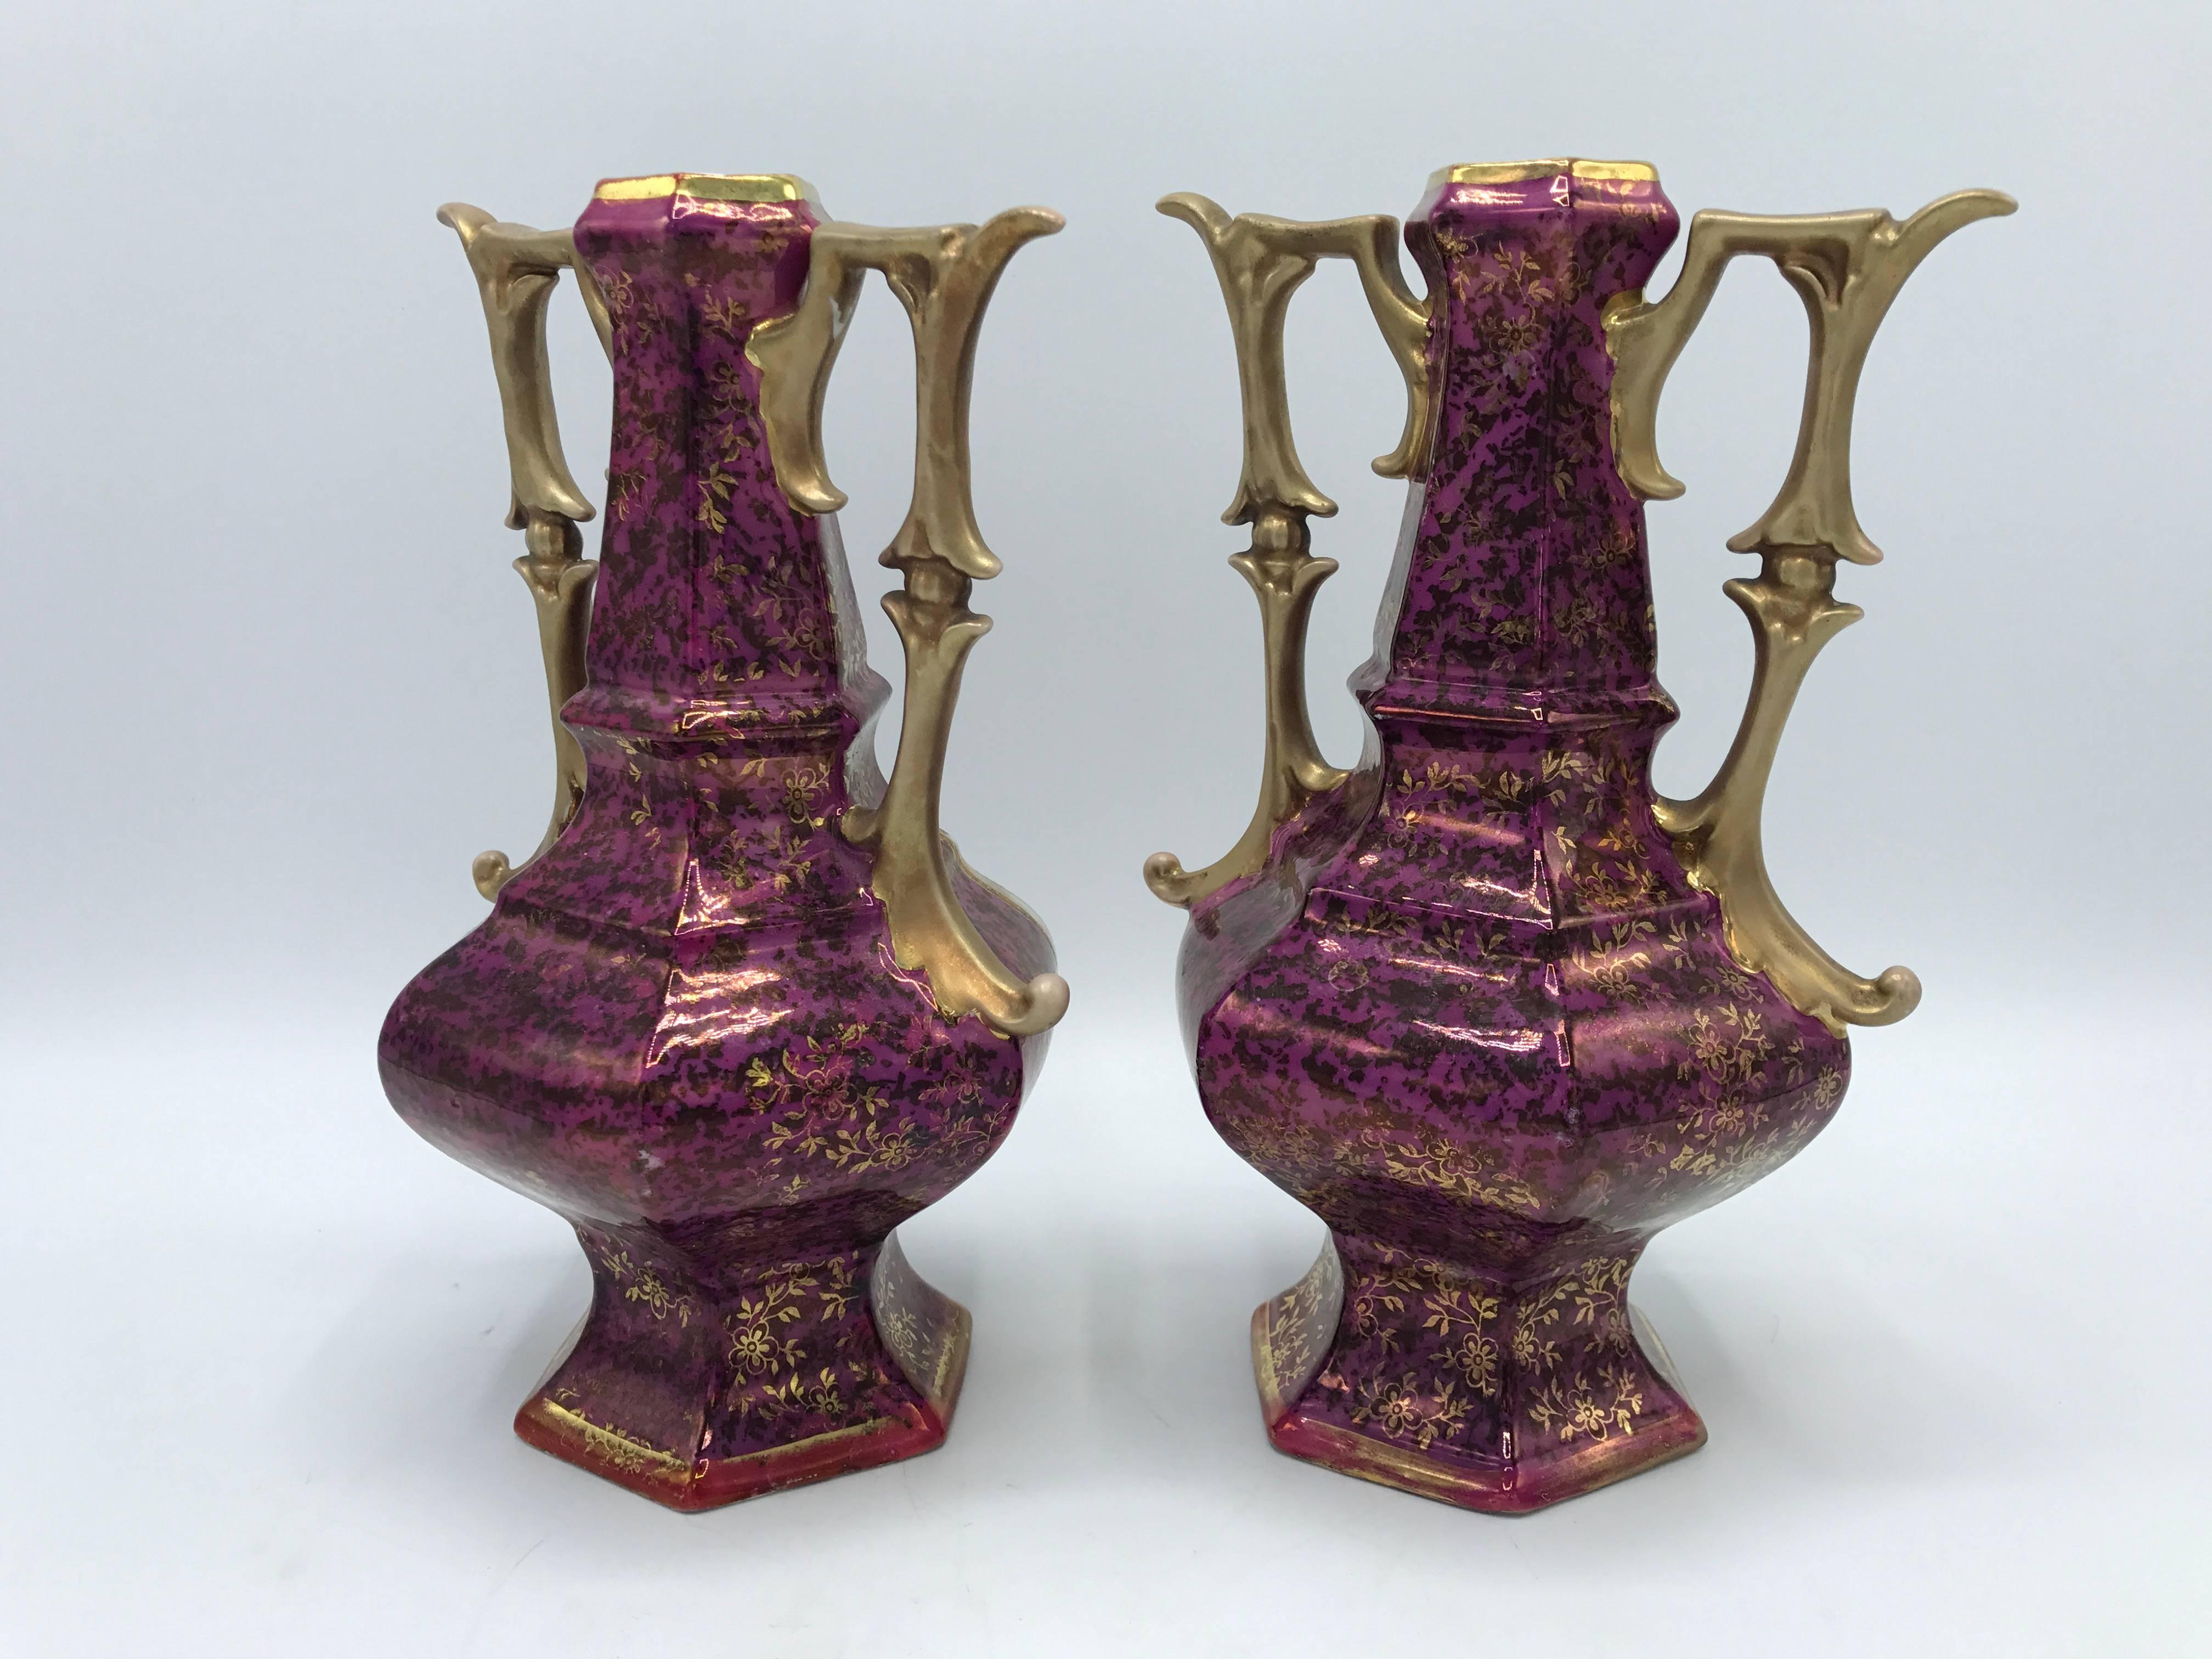 19th Century French Hand-Painted Pink and Gold Vases with Handles, Pair 1